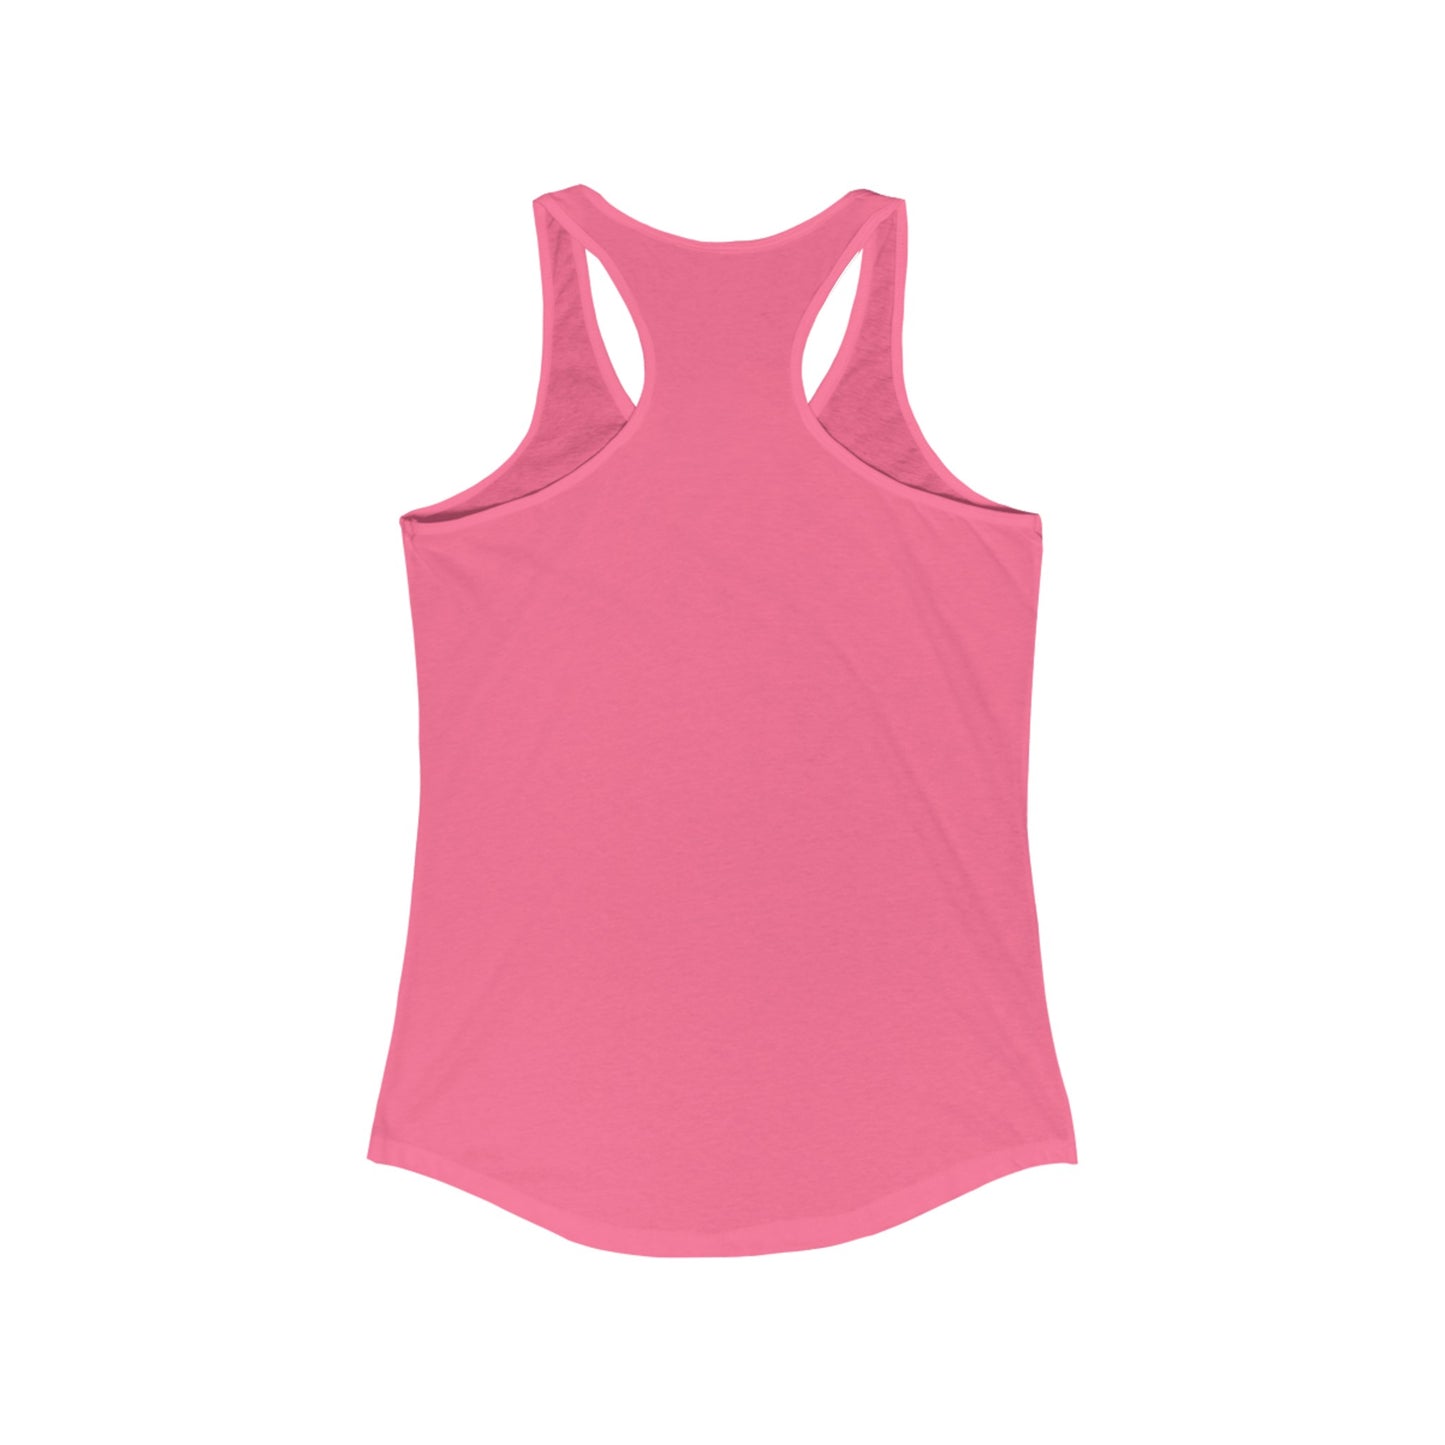 One More Rep Women's Ideal Racerback Tank